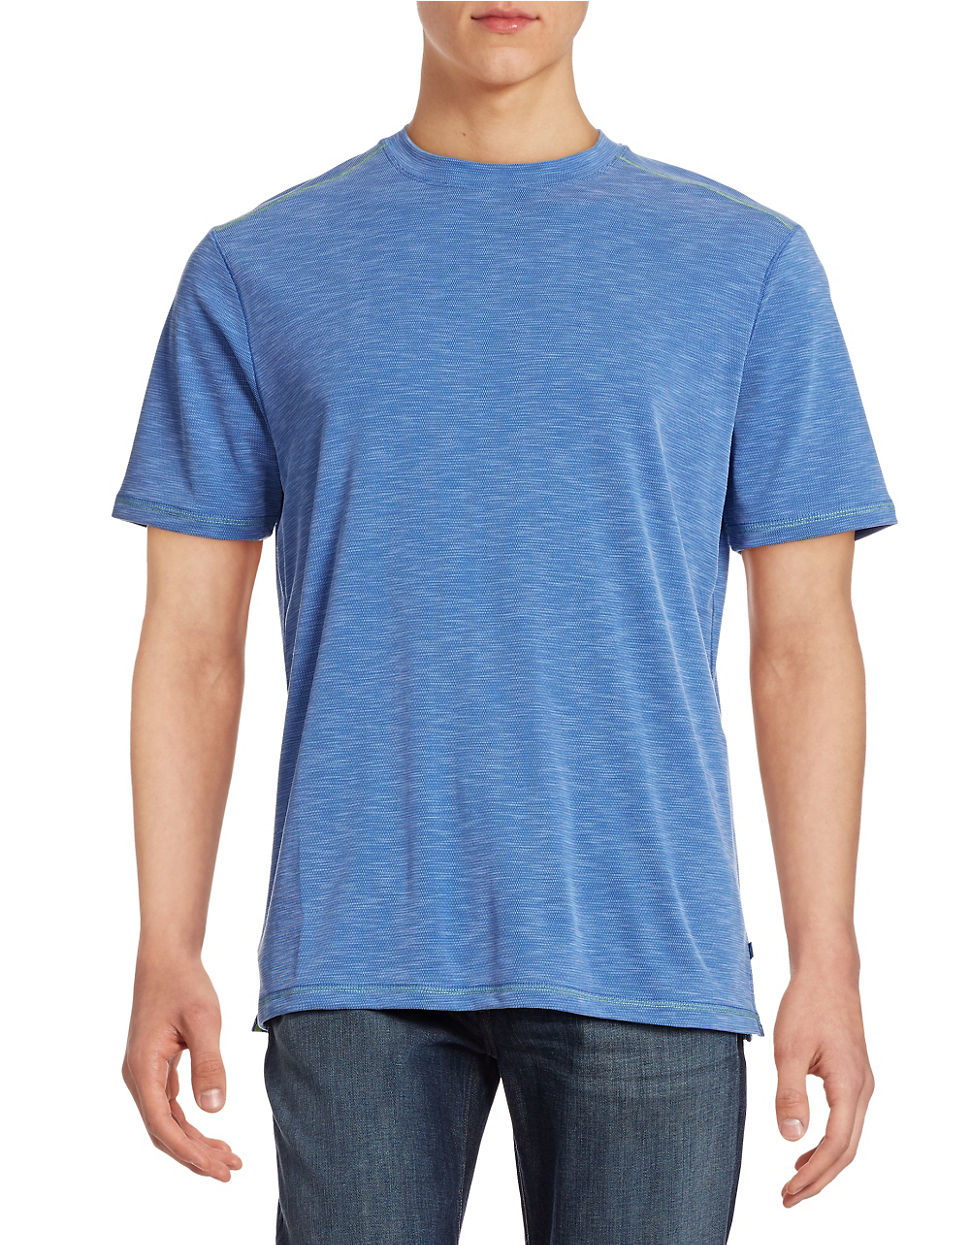 Lyst - Tommy Bahama Paradise Around Tee in Blue for Men